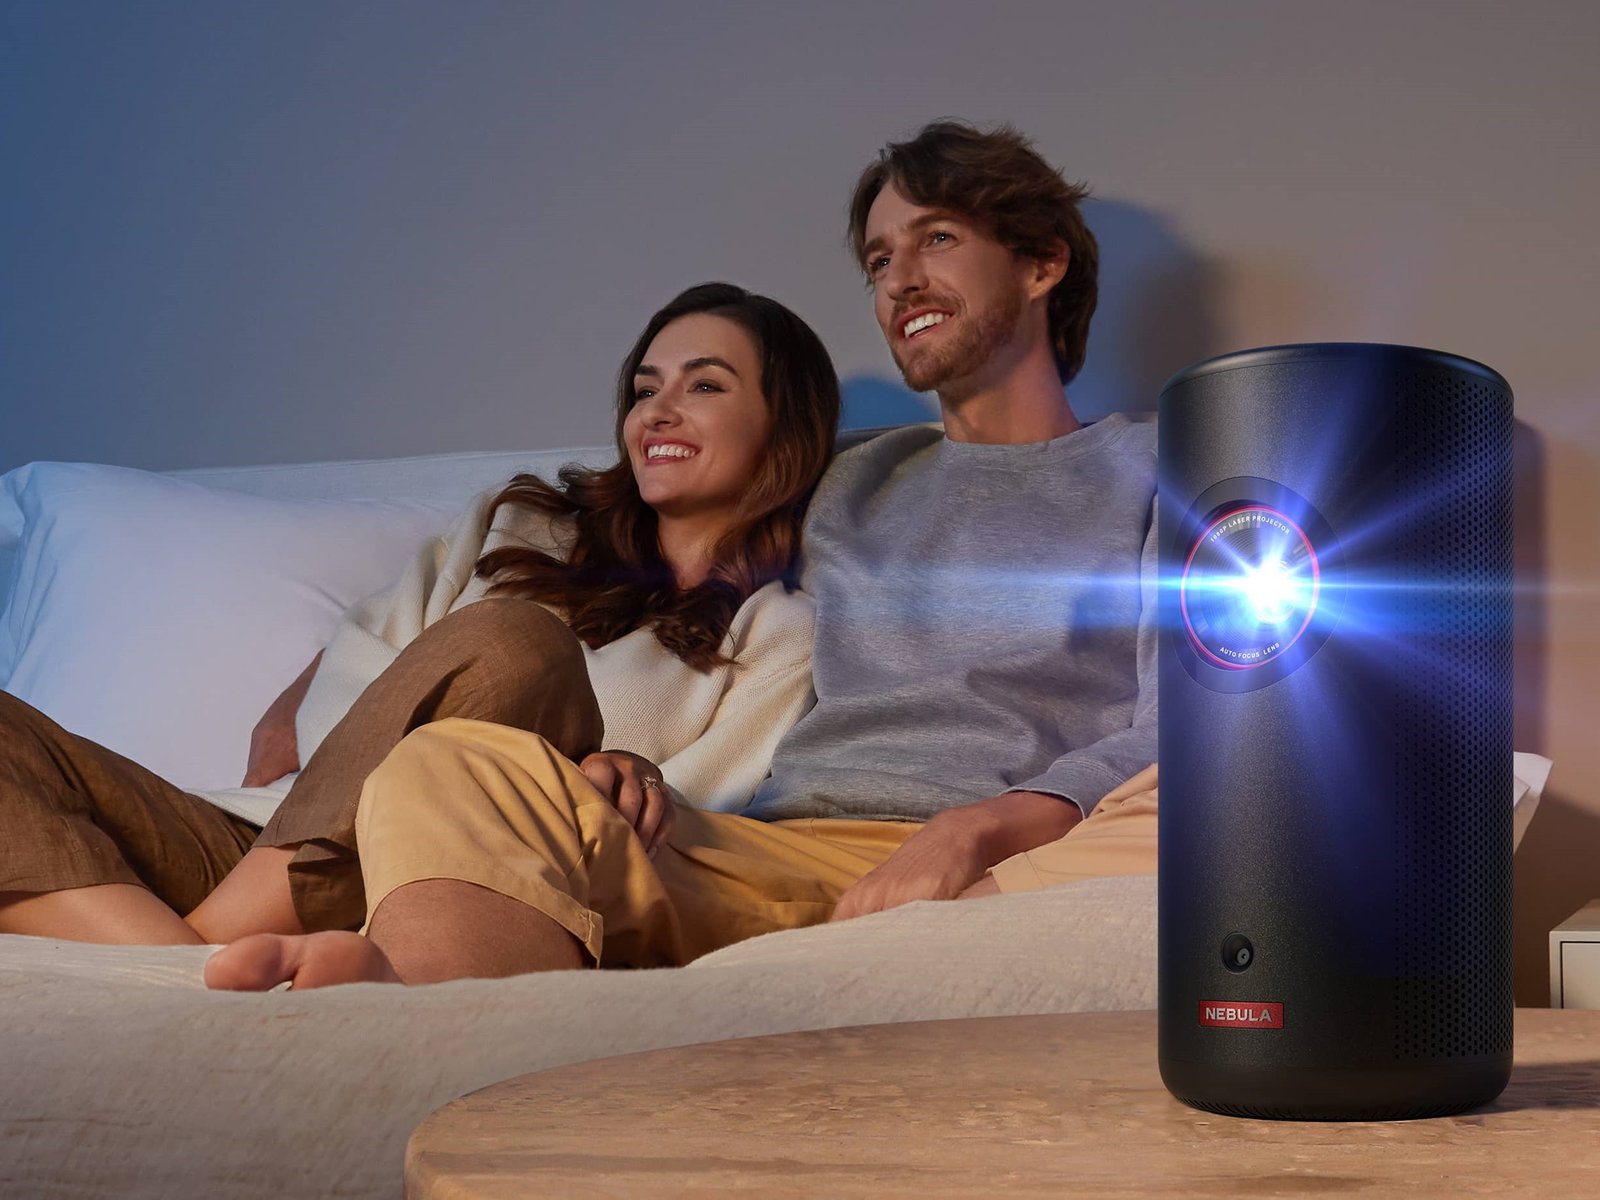 Anker Nebula Capsule 3 Laser Projector pre-picture campaign launches with US$120 cut rate